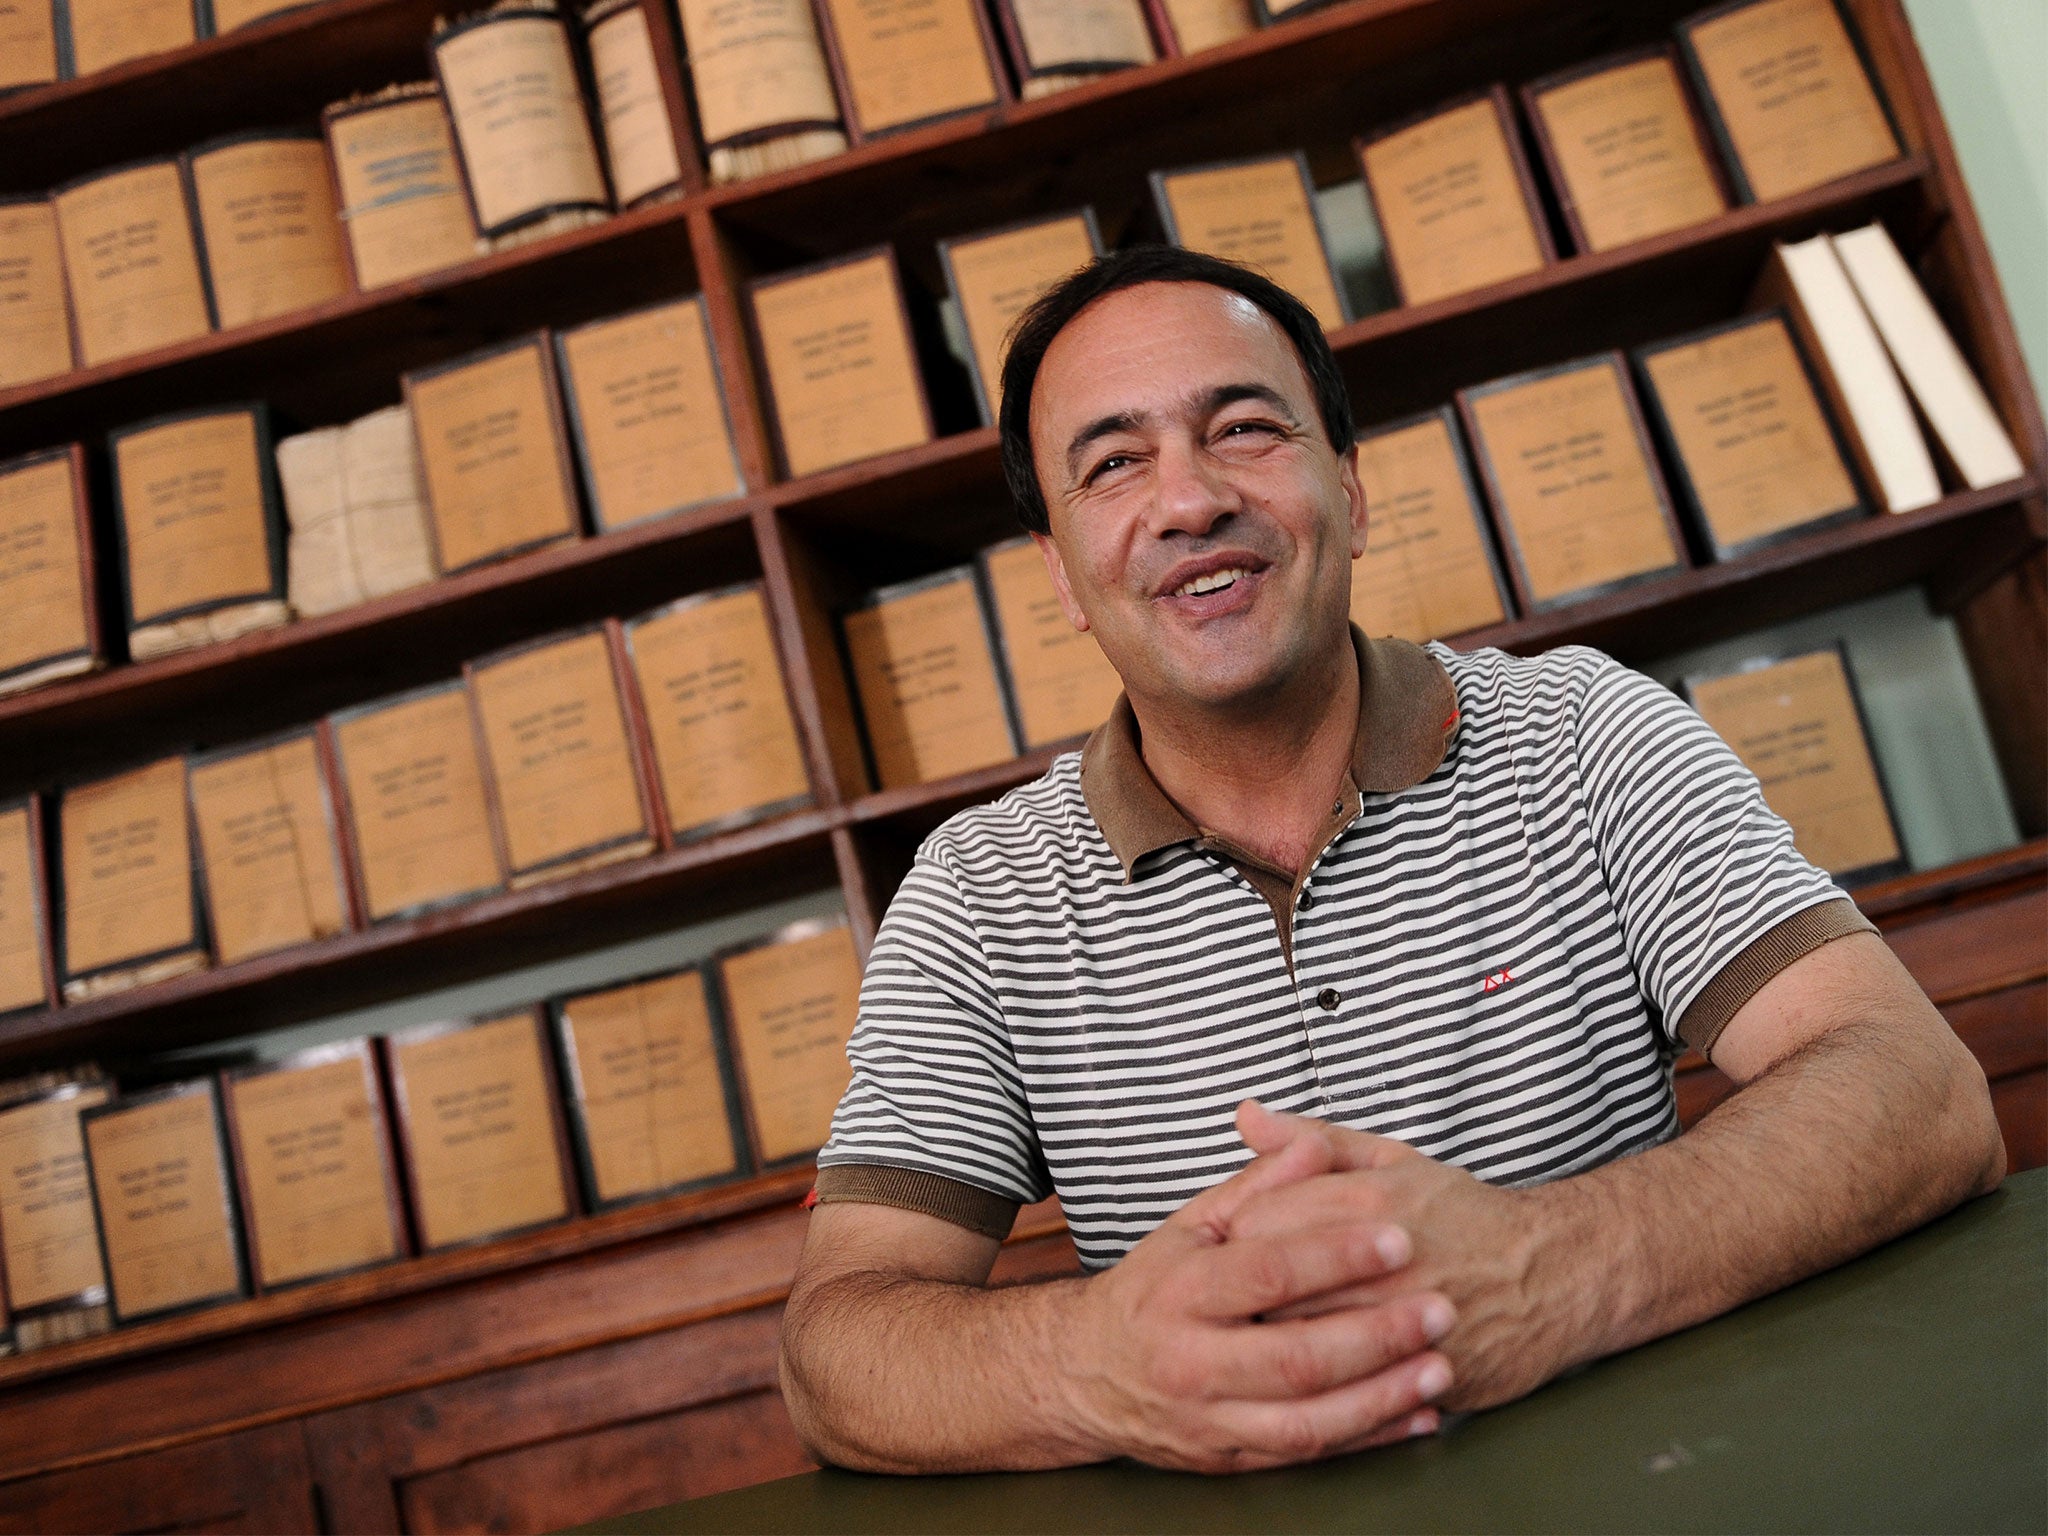 Domenico Lucano became internationally famous during the migrant crisis for his efforts to welcome refugees